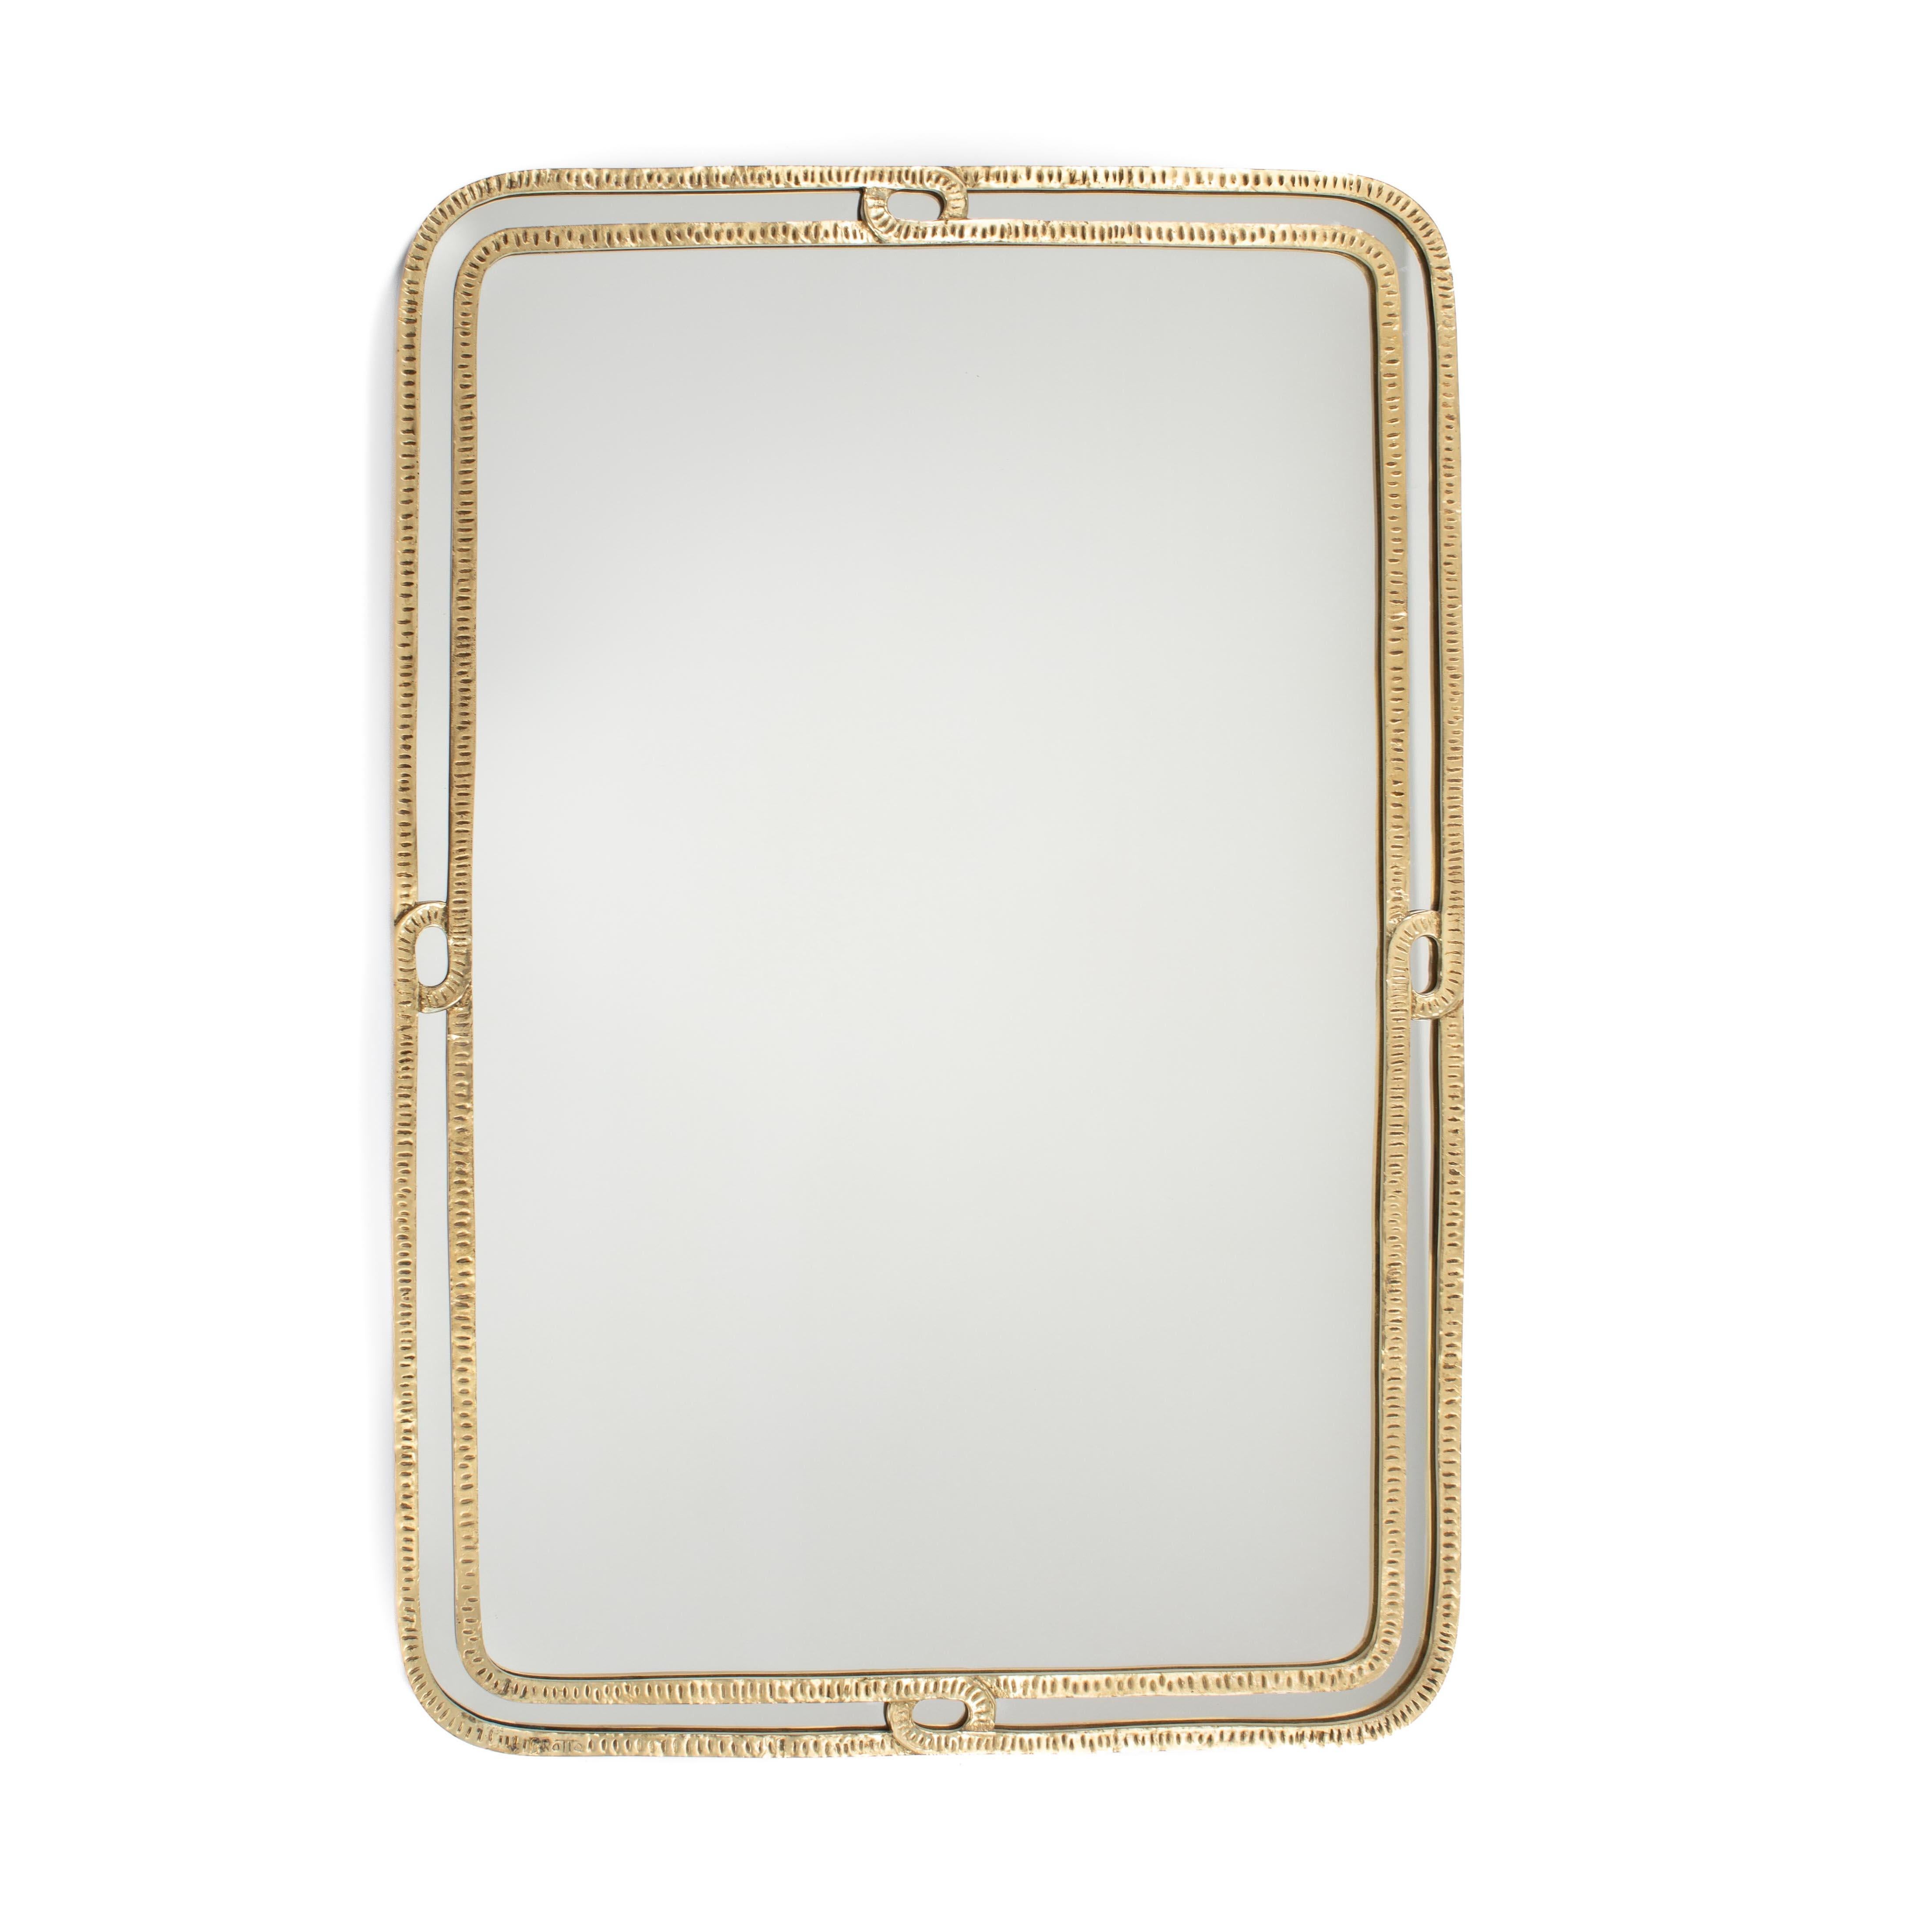 Fantastic mirror by Angelo Brotto that impresses with its simplicity and the delicacy of the work.
The frame consists of 2 bronze strips lying next to each other which are connected to each other with a loop on the 4 sides.
On the front side, the